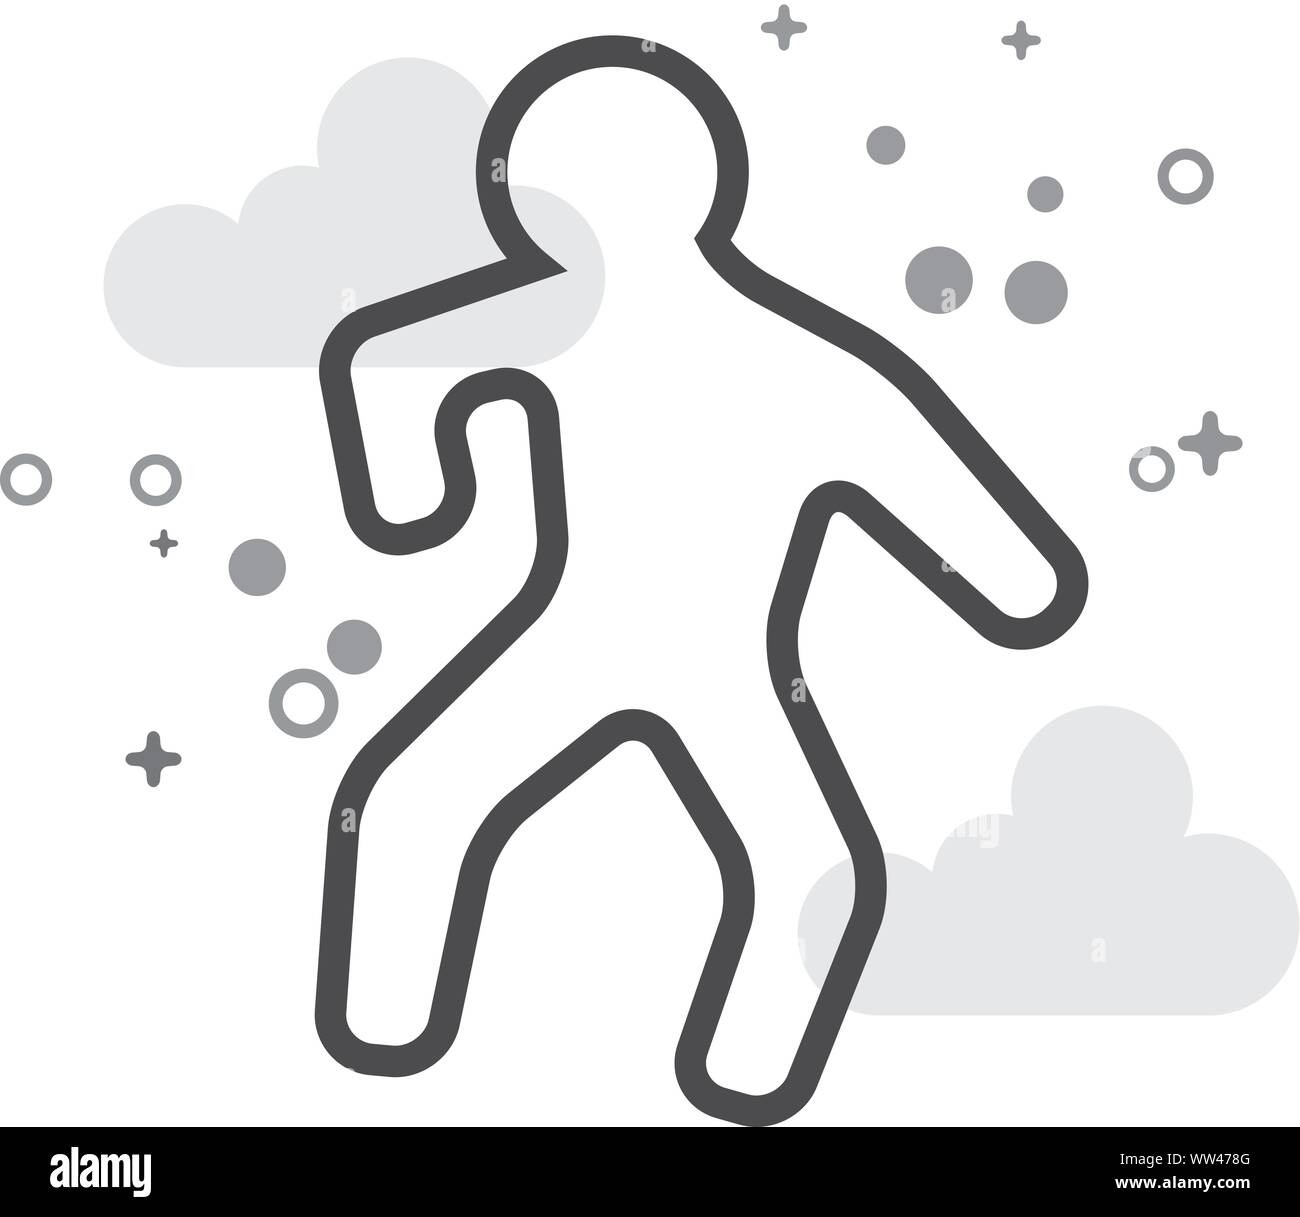 Crime victim icon in flat outlined grayscale style. Vector illustration. Stock Vector